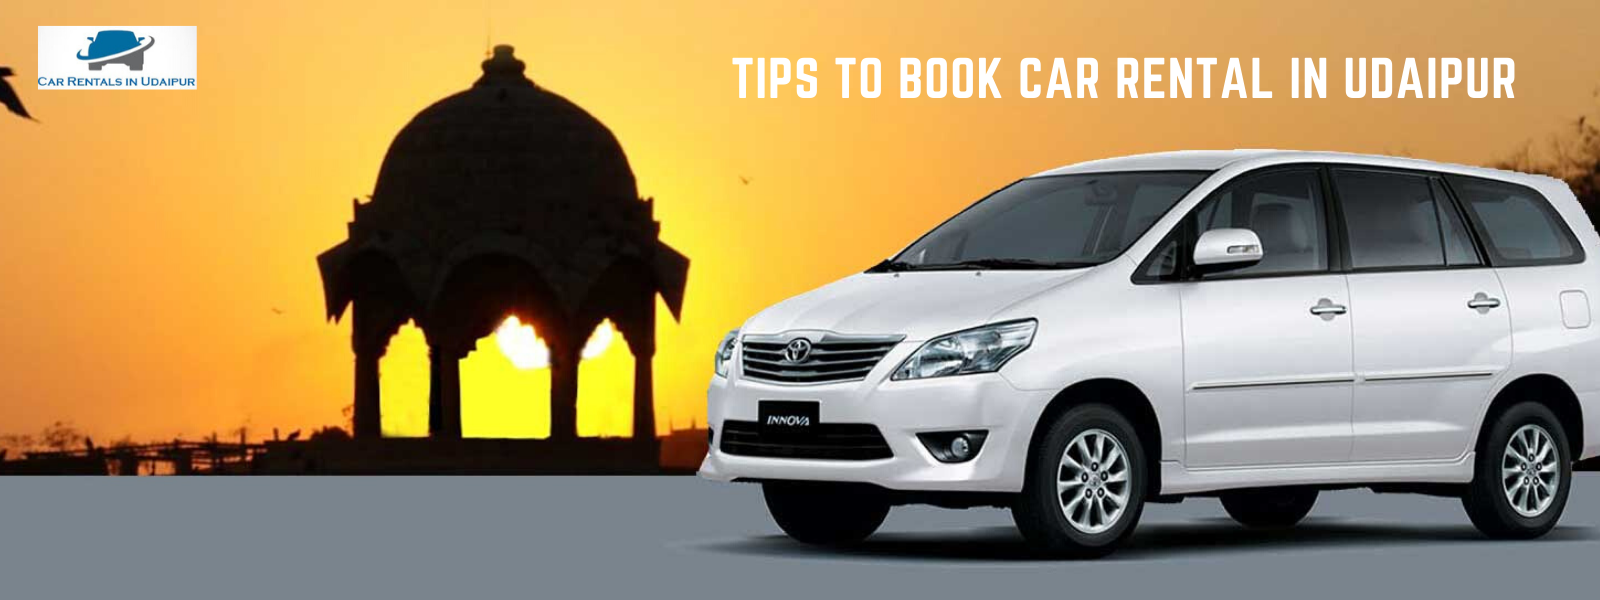 Tips to Book Car Rental in Udaipur